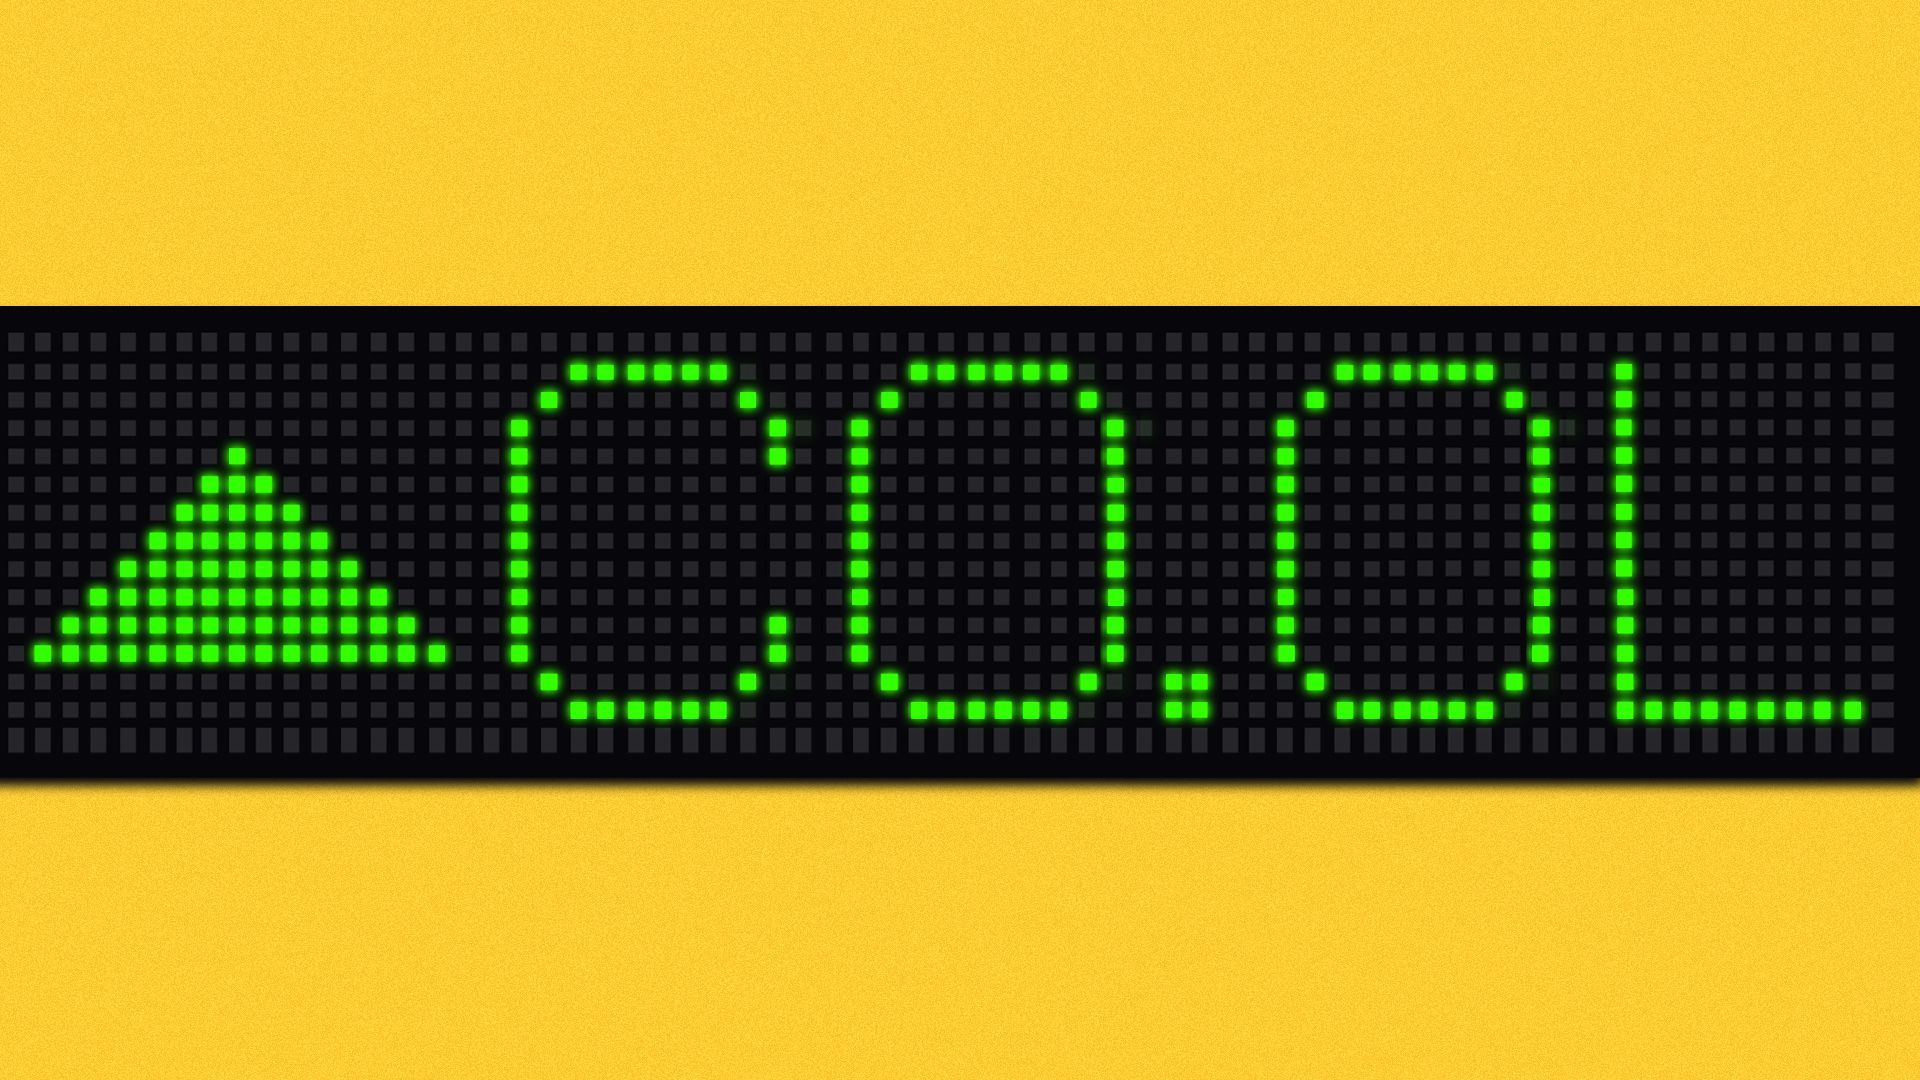 Illustration of a stock ticker spelling out the word "cool" in place of numbers